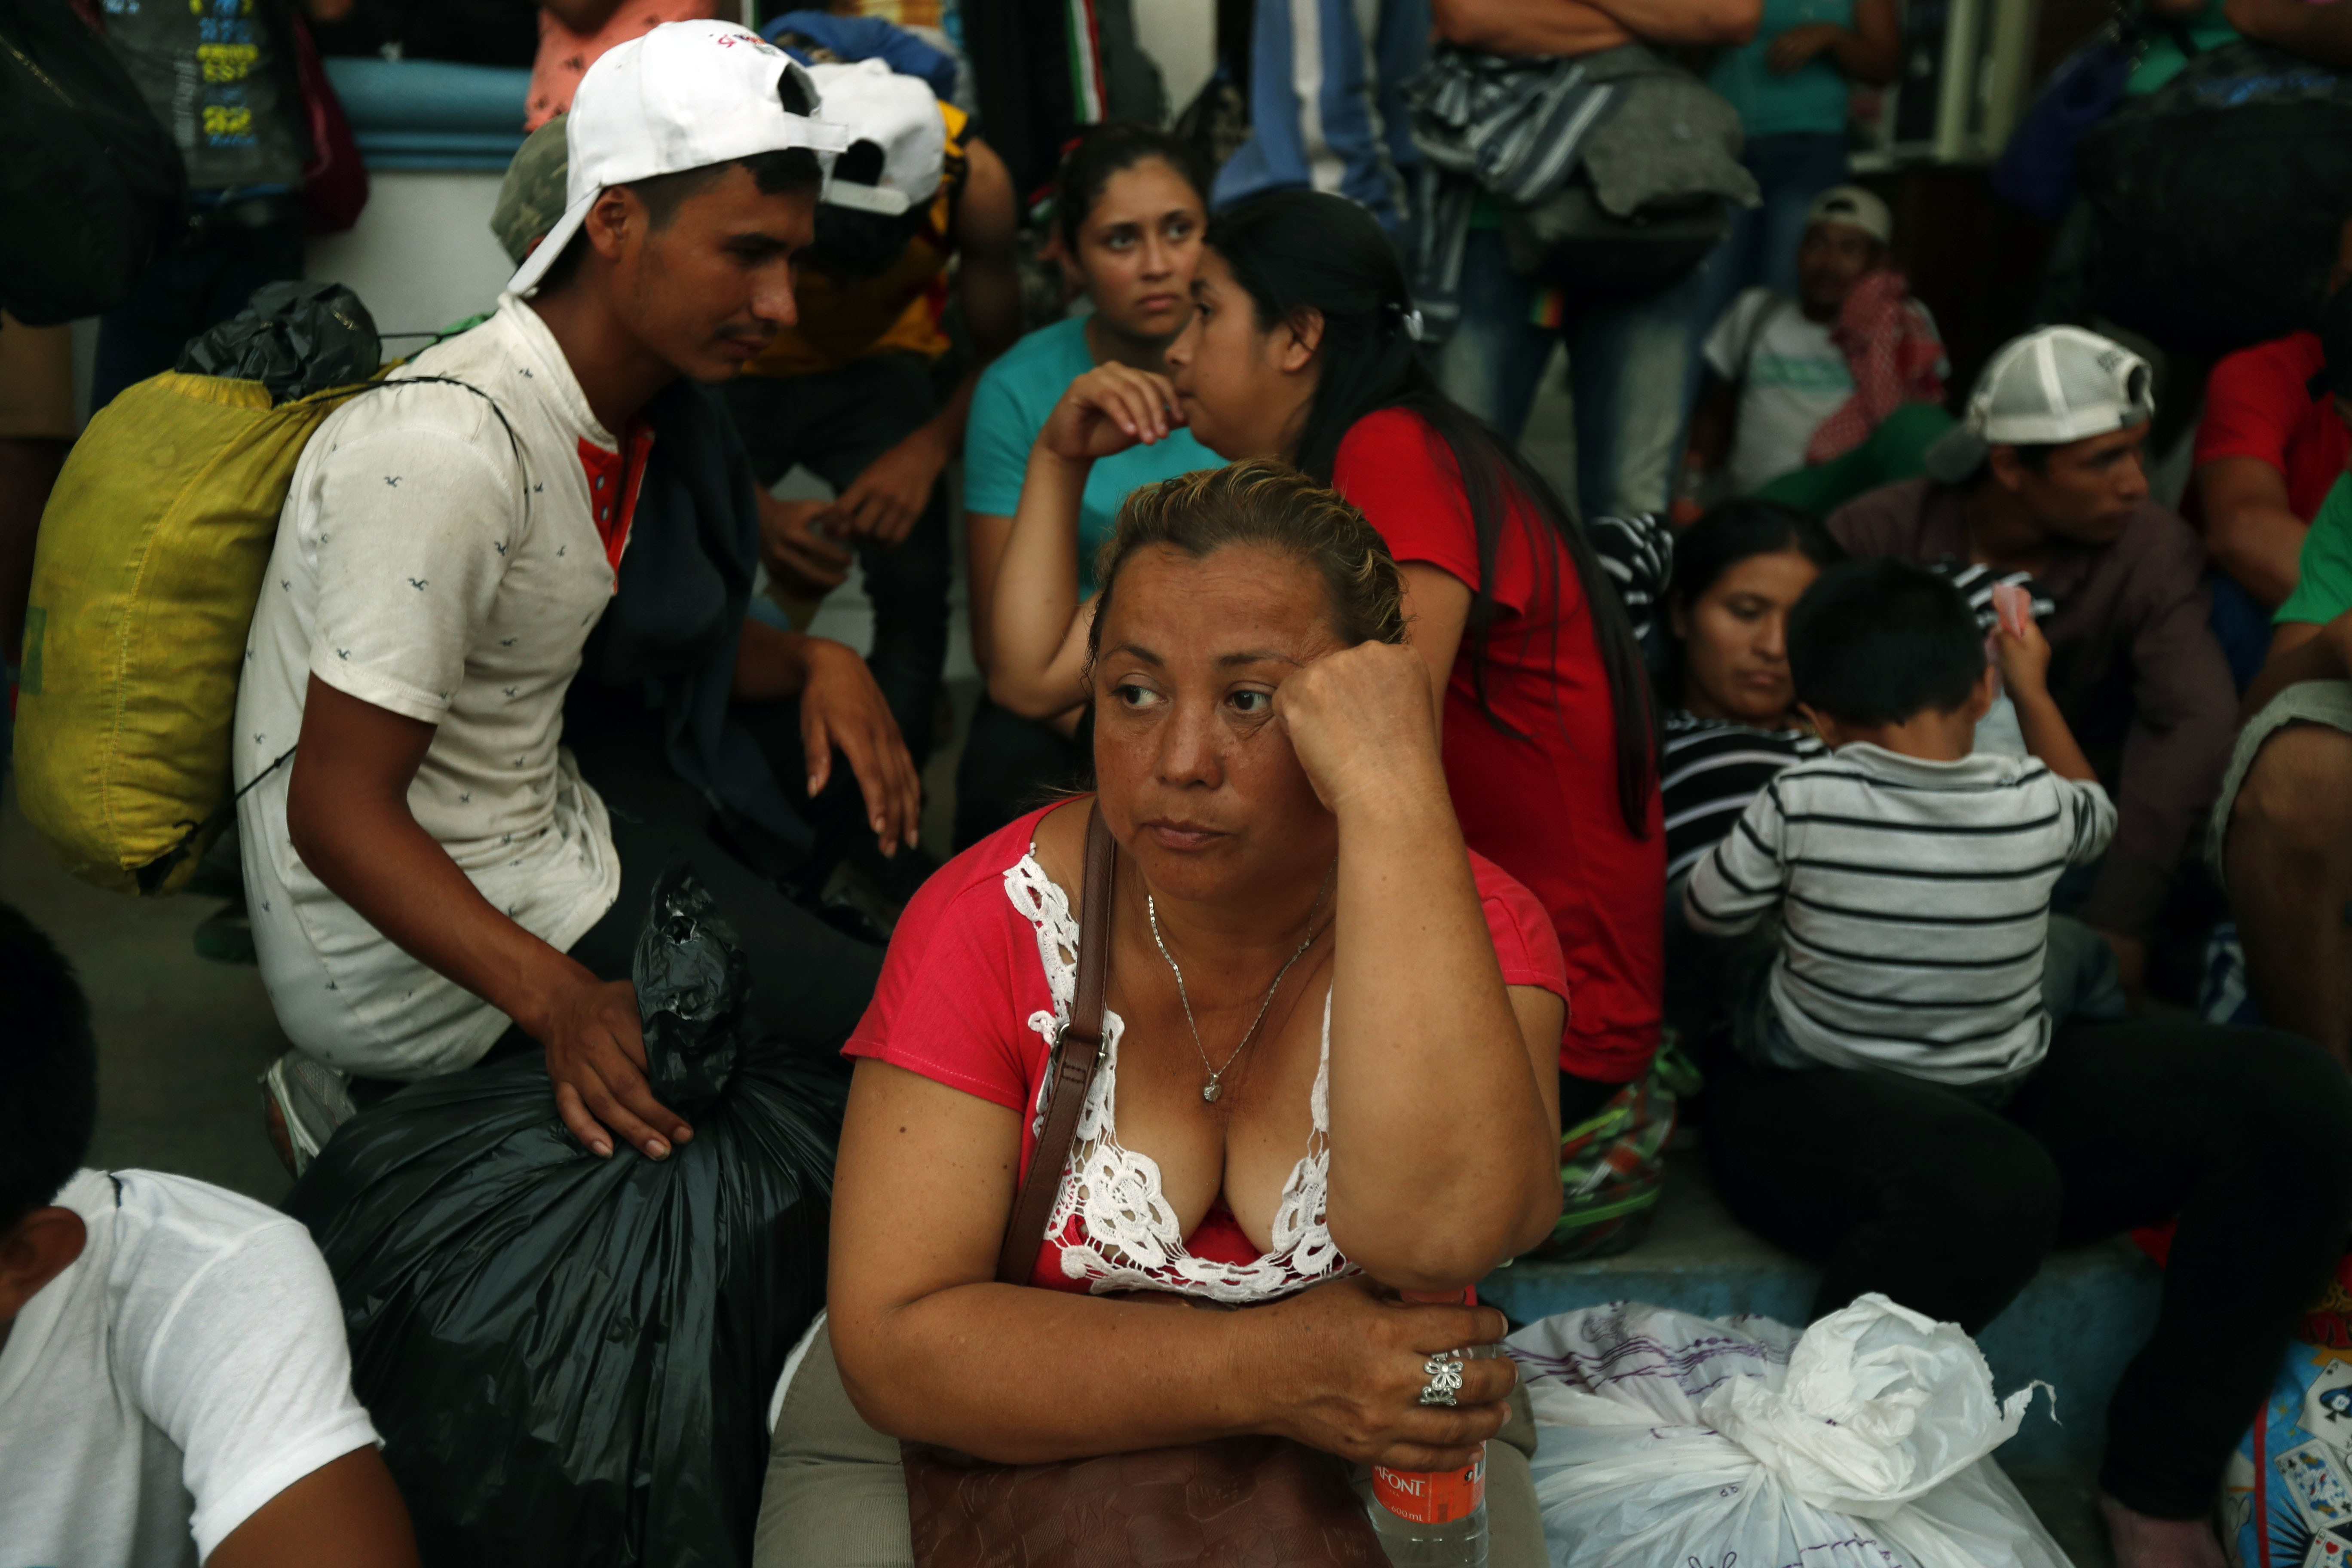 Honduran migrants wait to board a bus at the service of the Mexican National Migration Institute, to voluntarily return to their home country, in Huixtla, Mexico, Wednesday, Oct. 24, 2018. LIttle by little, sickness, fear and police harassment are whittling down the migrant caravan making its way through southern Mexico to the U.S. border. (AP Photo/Moises Castillo)